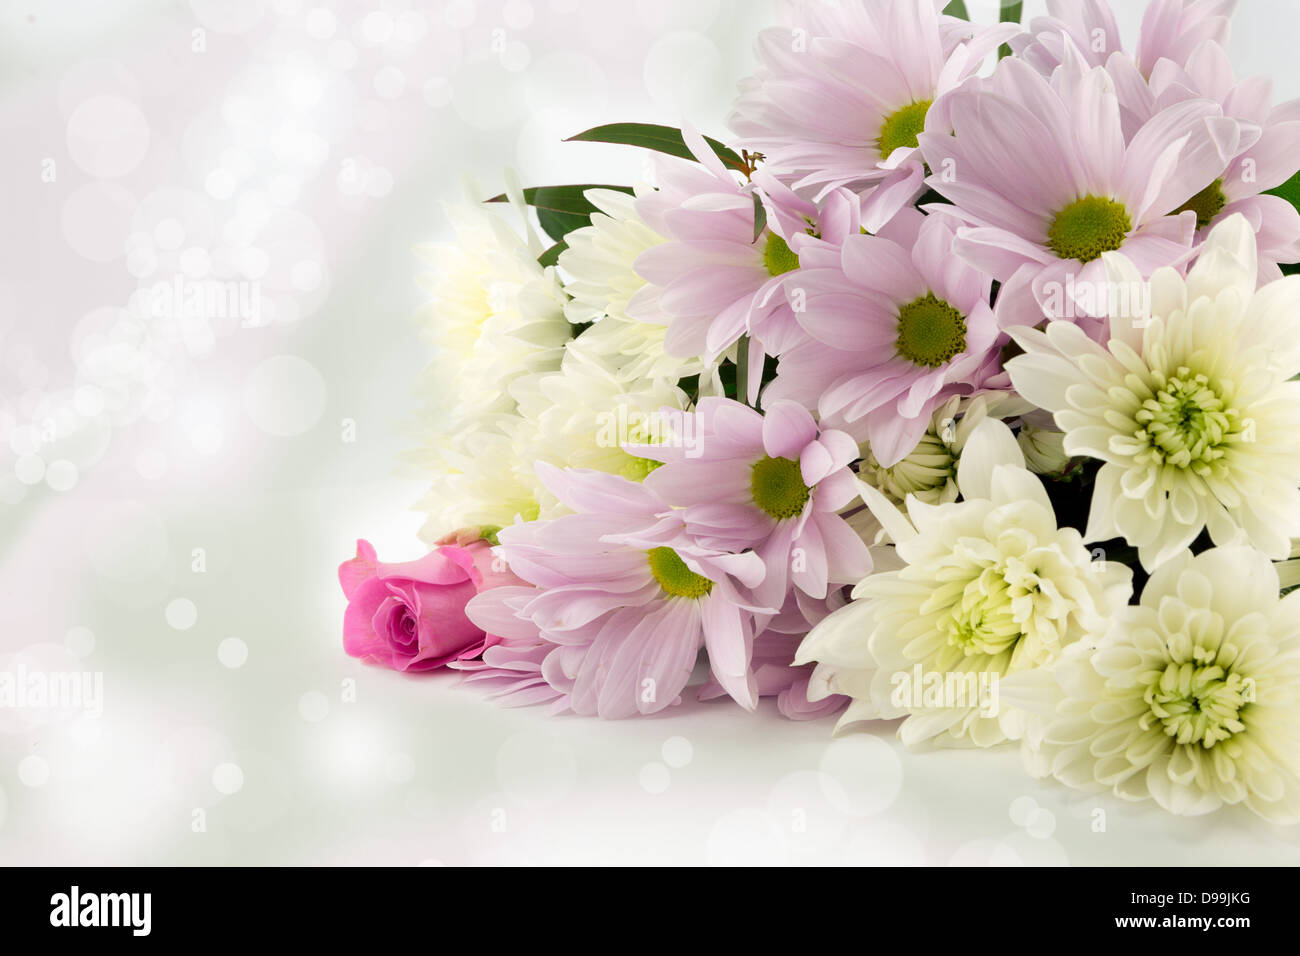 Pastel pink and white chrysanthemum bouquet with a soft diffused background Stock Photo